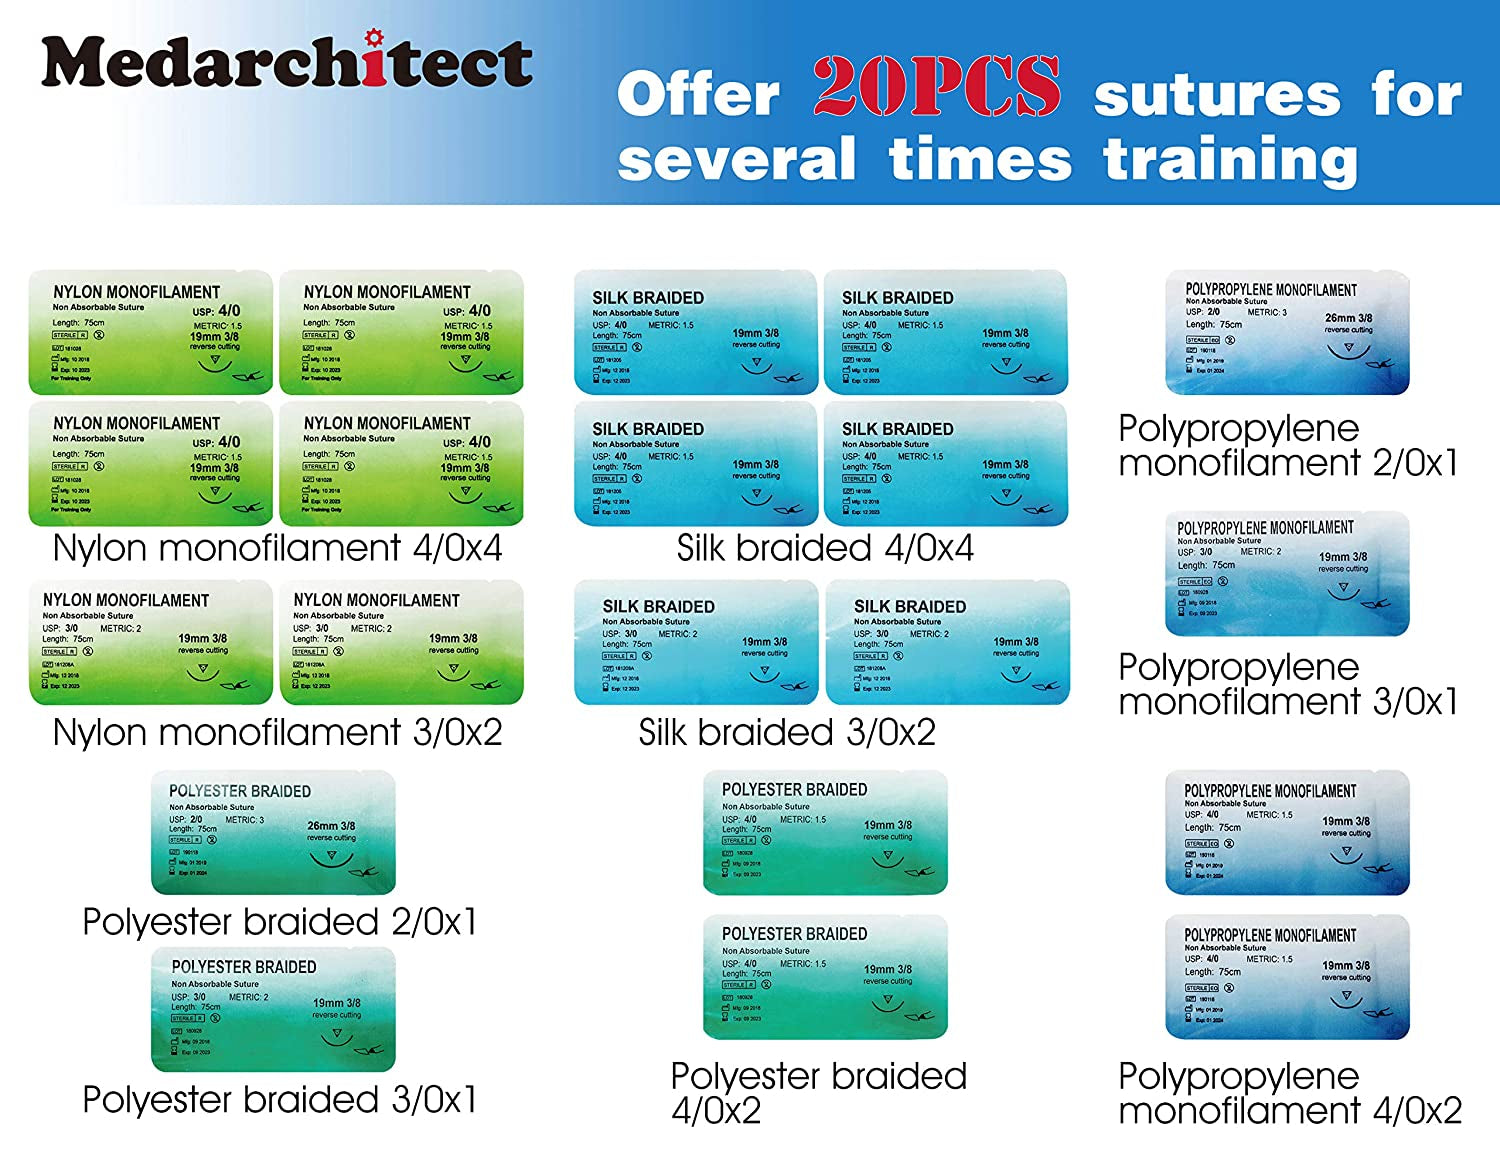 Suture Practice Complete Kit (30 Pieces) for Medical Student Suture Training, Include Upgrade Suture Pad with 14 Pre-Cut Wounds, Suture Tools, Suture Thread & Needle